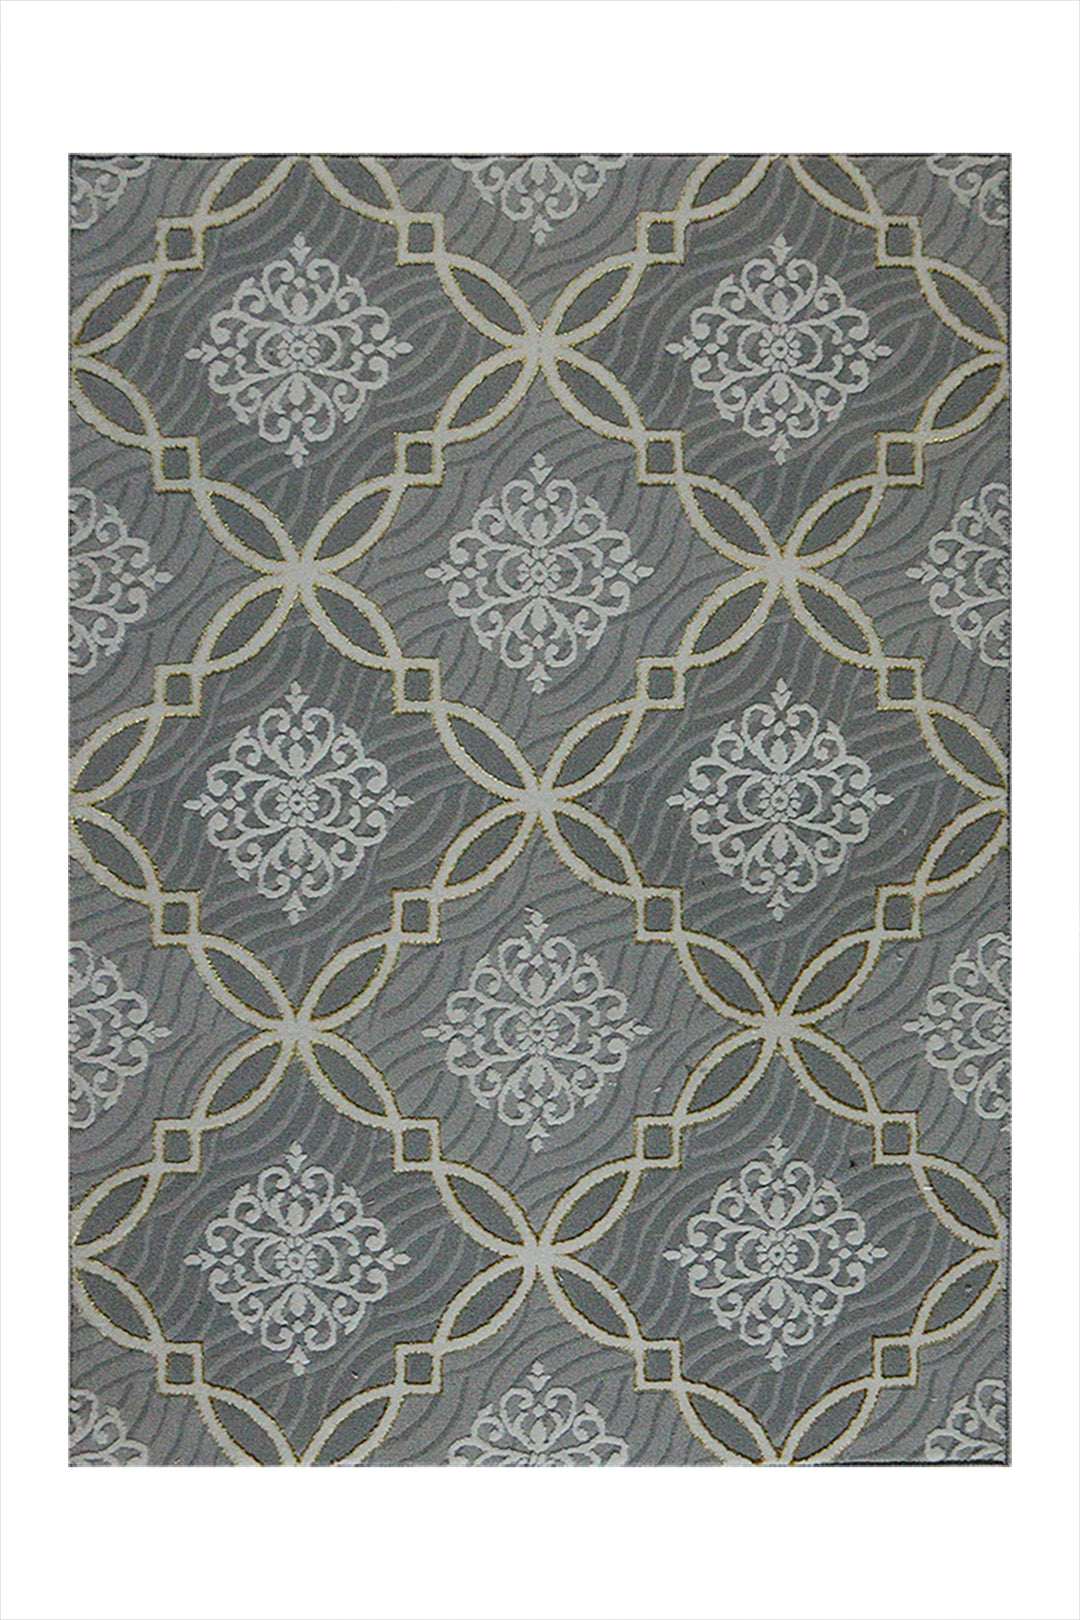 Turkish Modern  Festival 1 Rug - Gray - 3.2 x 4.9 FT - Superior Comfort, Modern Style Accent Rugs